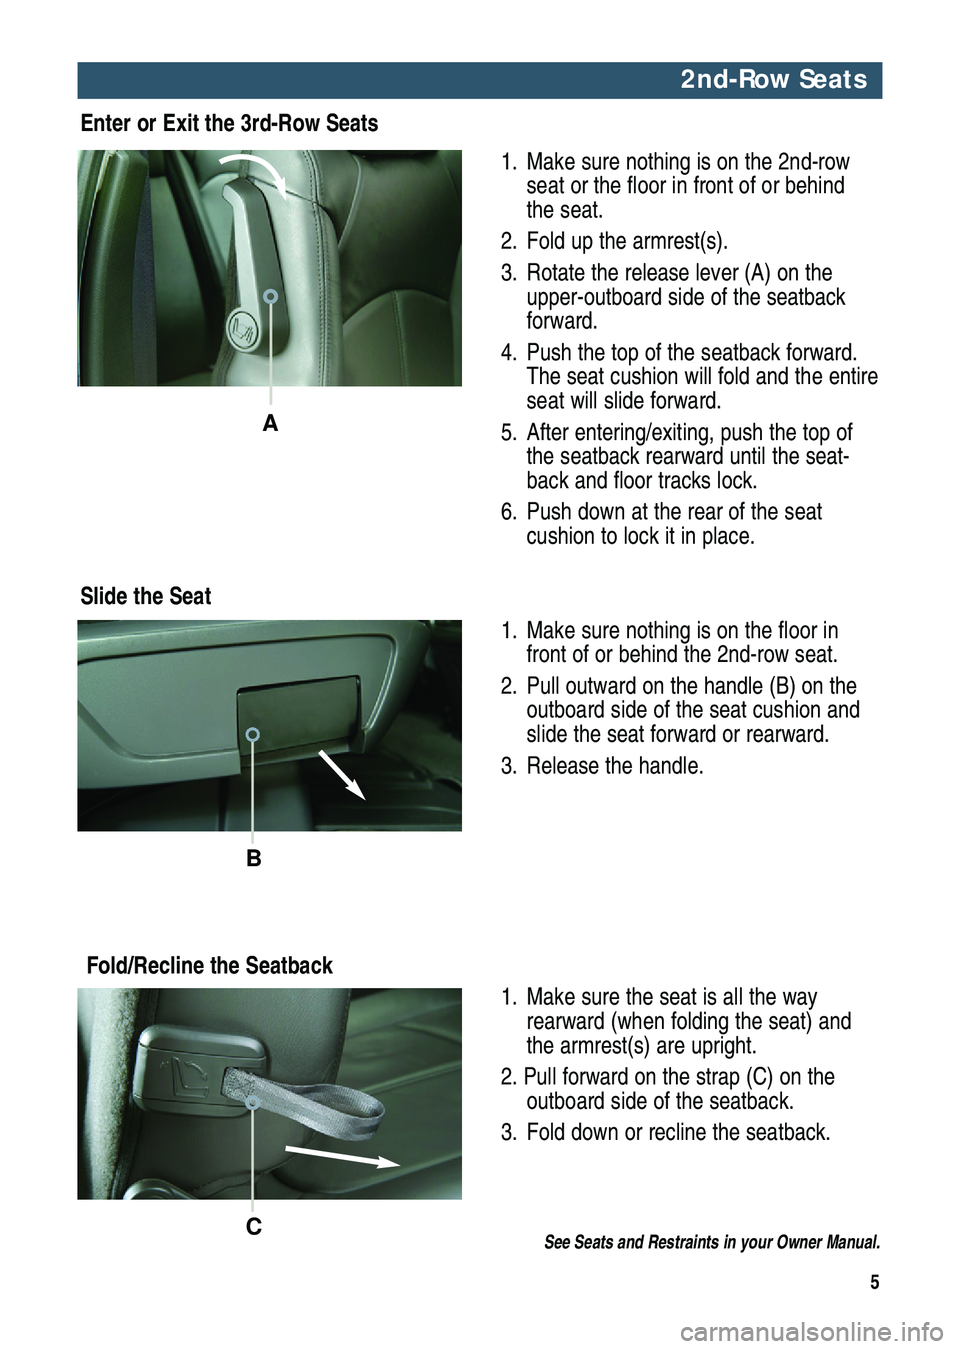 GMC ACADIA 2012  Get To Know Guide 5
A
2nd-Row Seats
Slide the Seat1. Make sure nothing is on the 2nd-row
seat or the floor in front of or behind
the seat.
2. Fold up the armrest(s).
3. Rotate the release lever (A) on the
upper-outboar